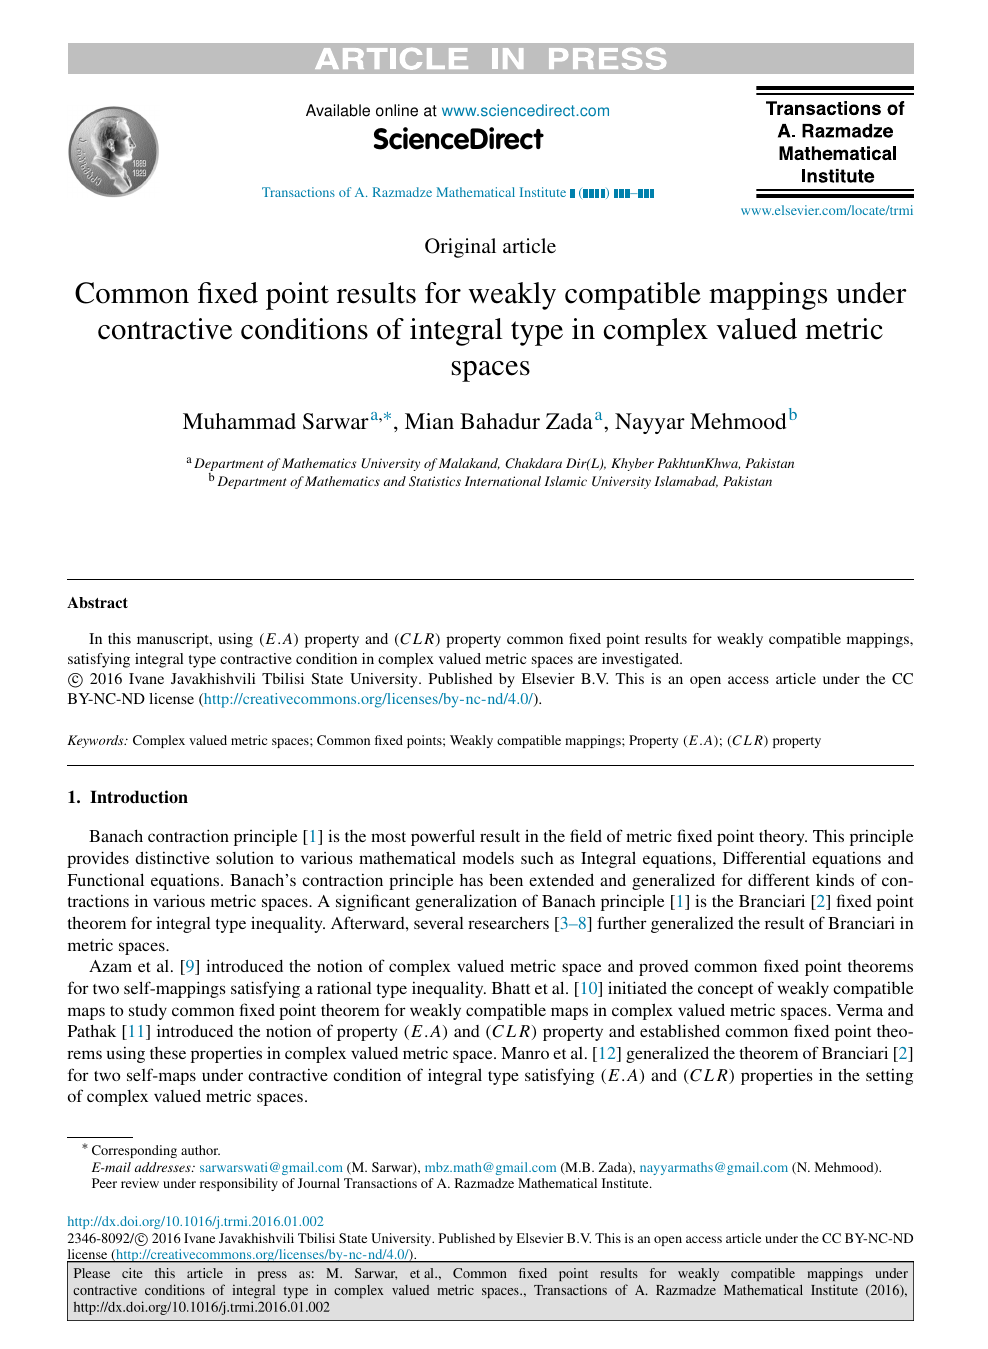 Common Fixed Point Results For Weakly Compatible Mappings Under Contractive Conditions Of Integral Type In Complex Valued Metric Spaces Topic Of Research Paper In Mathematics Download Scholarly Article Pdf And Read